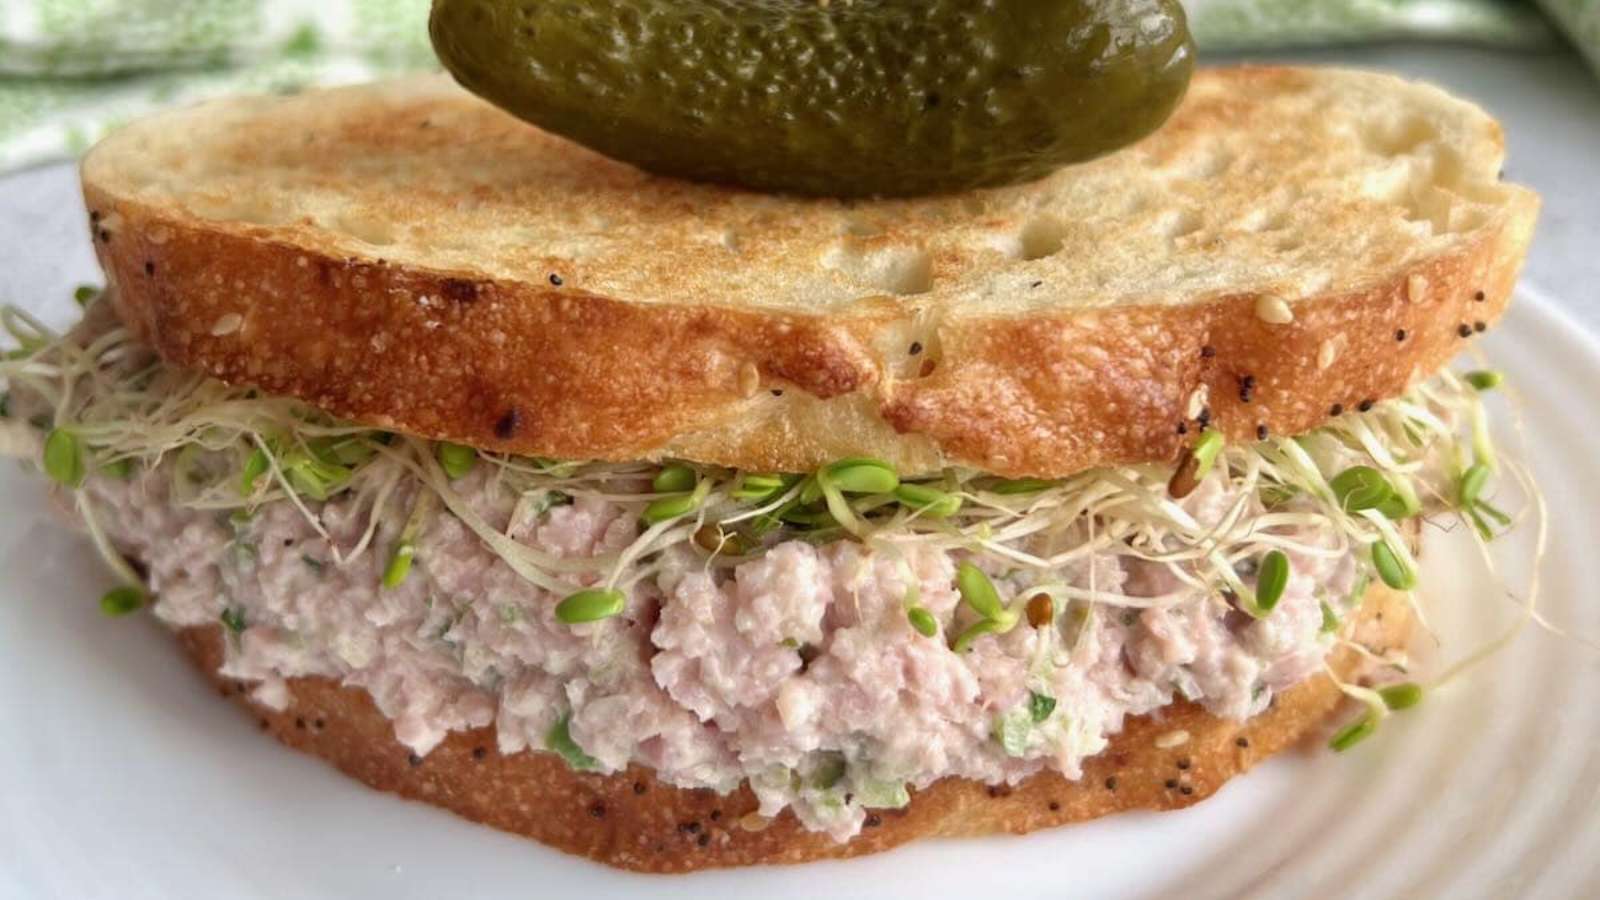 A sandwich with ham salad and sprouts on a plate.